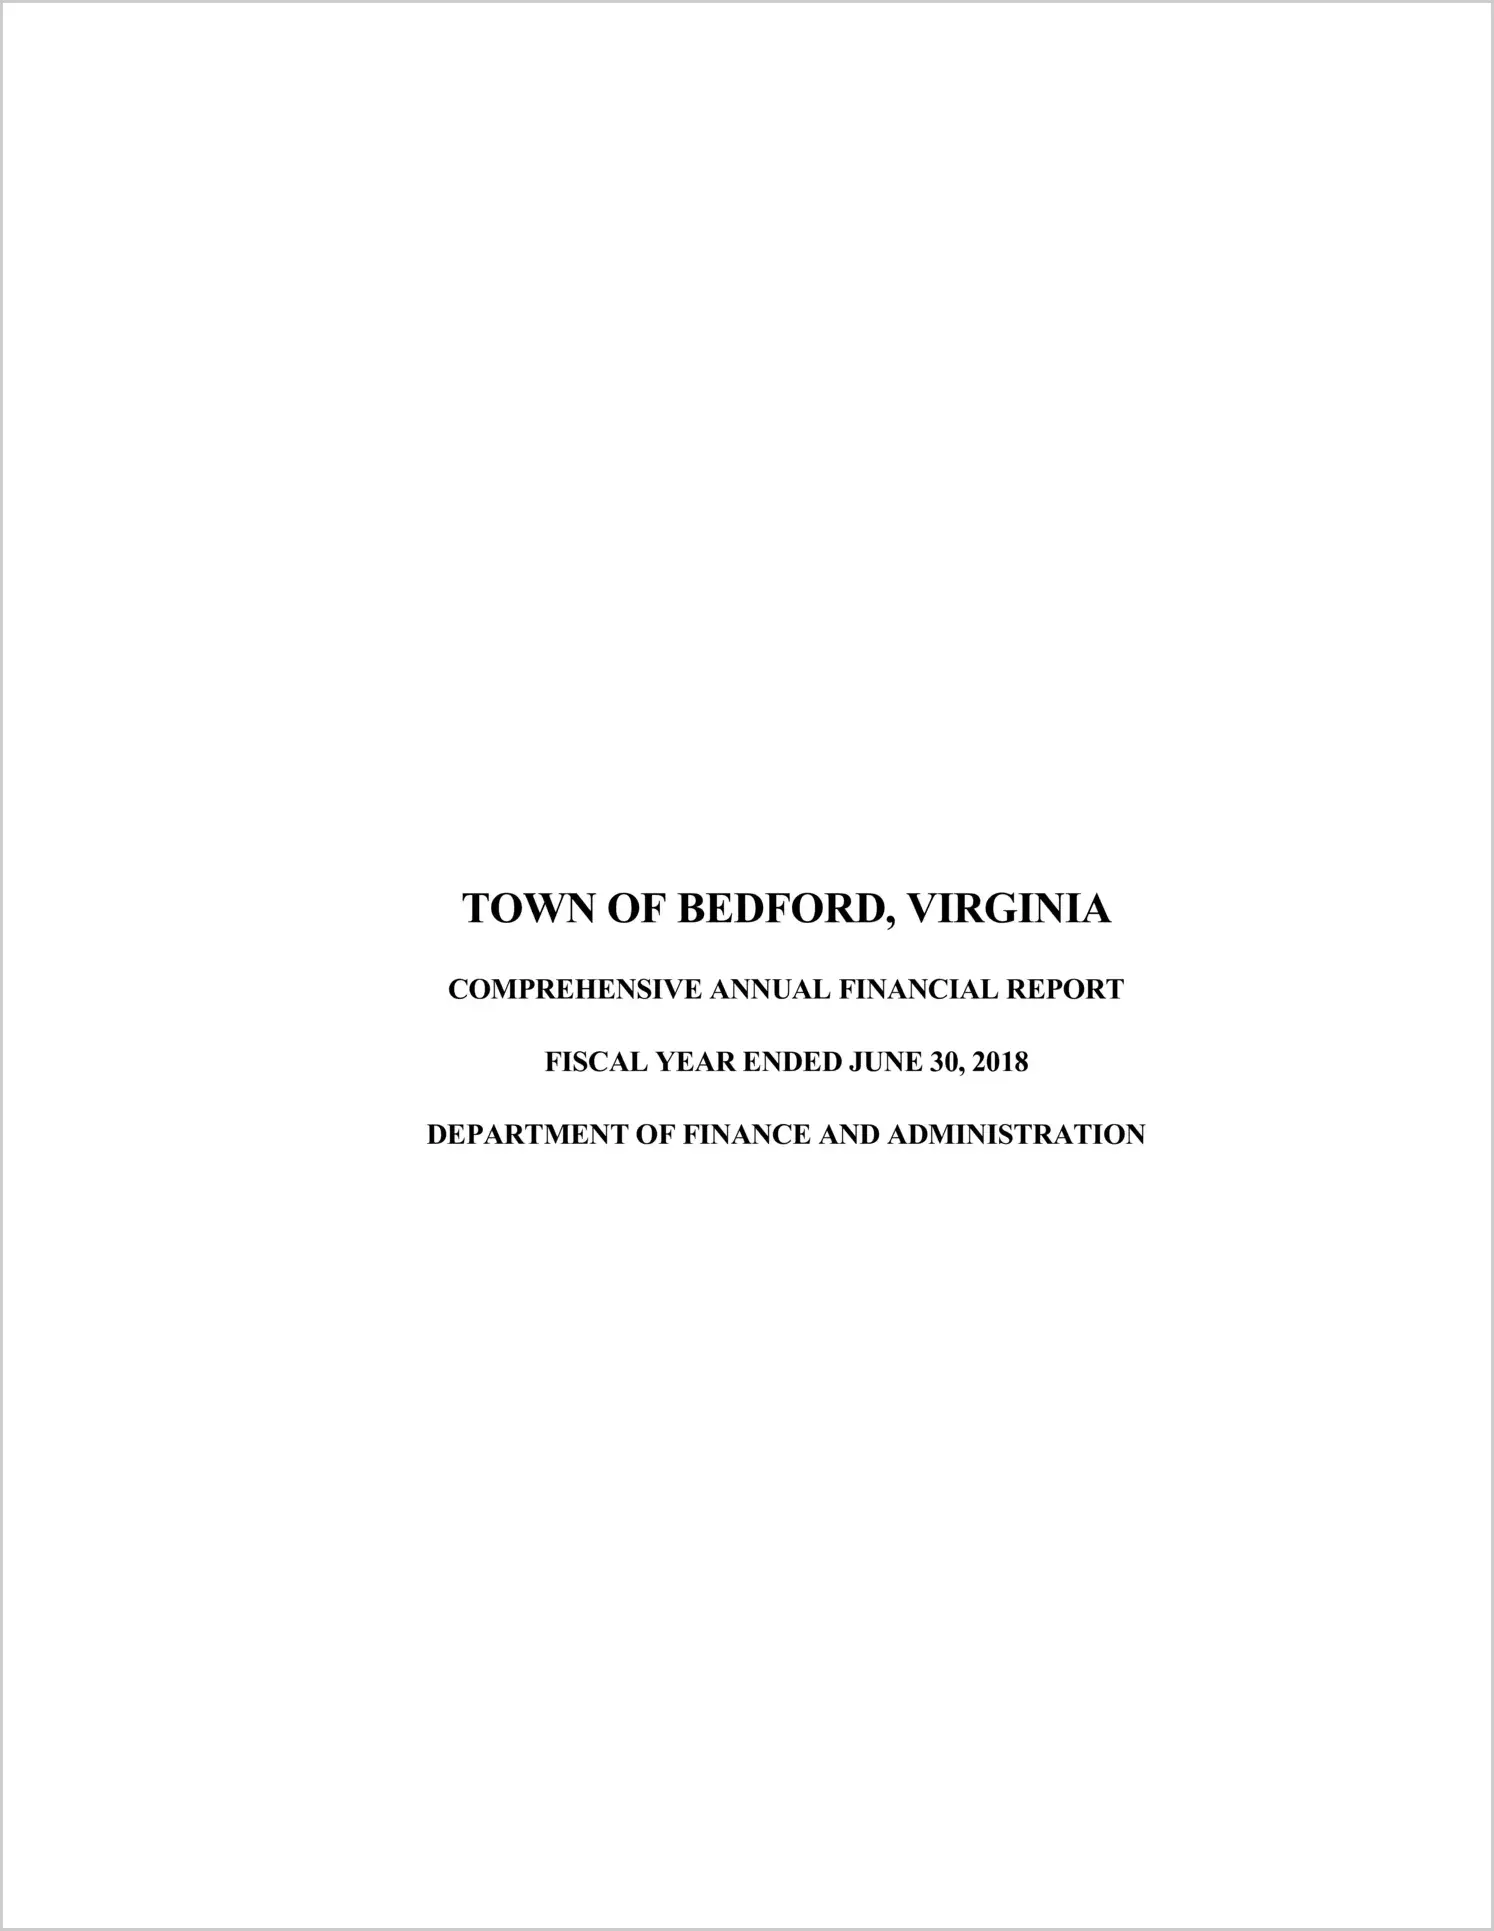 2018 Annual Financial Report for Town of Bedford